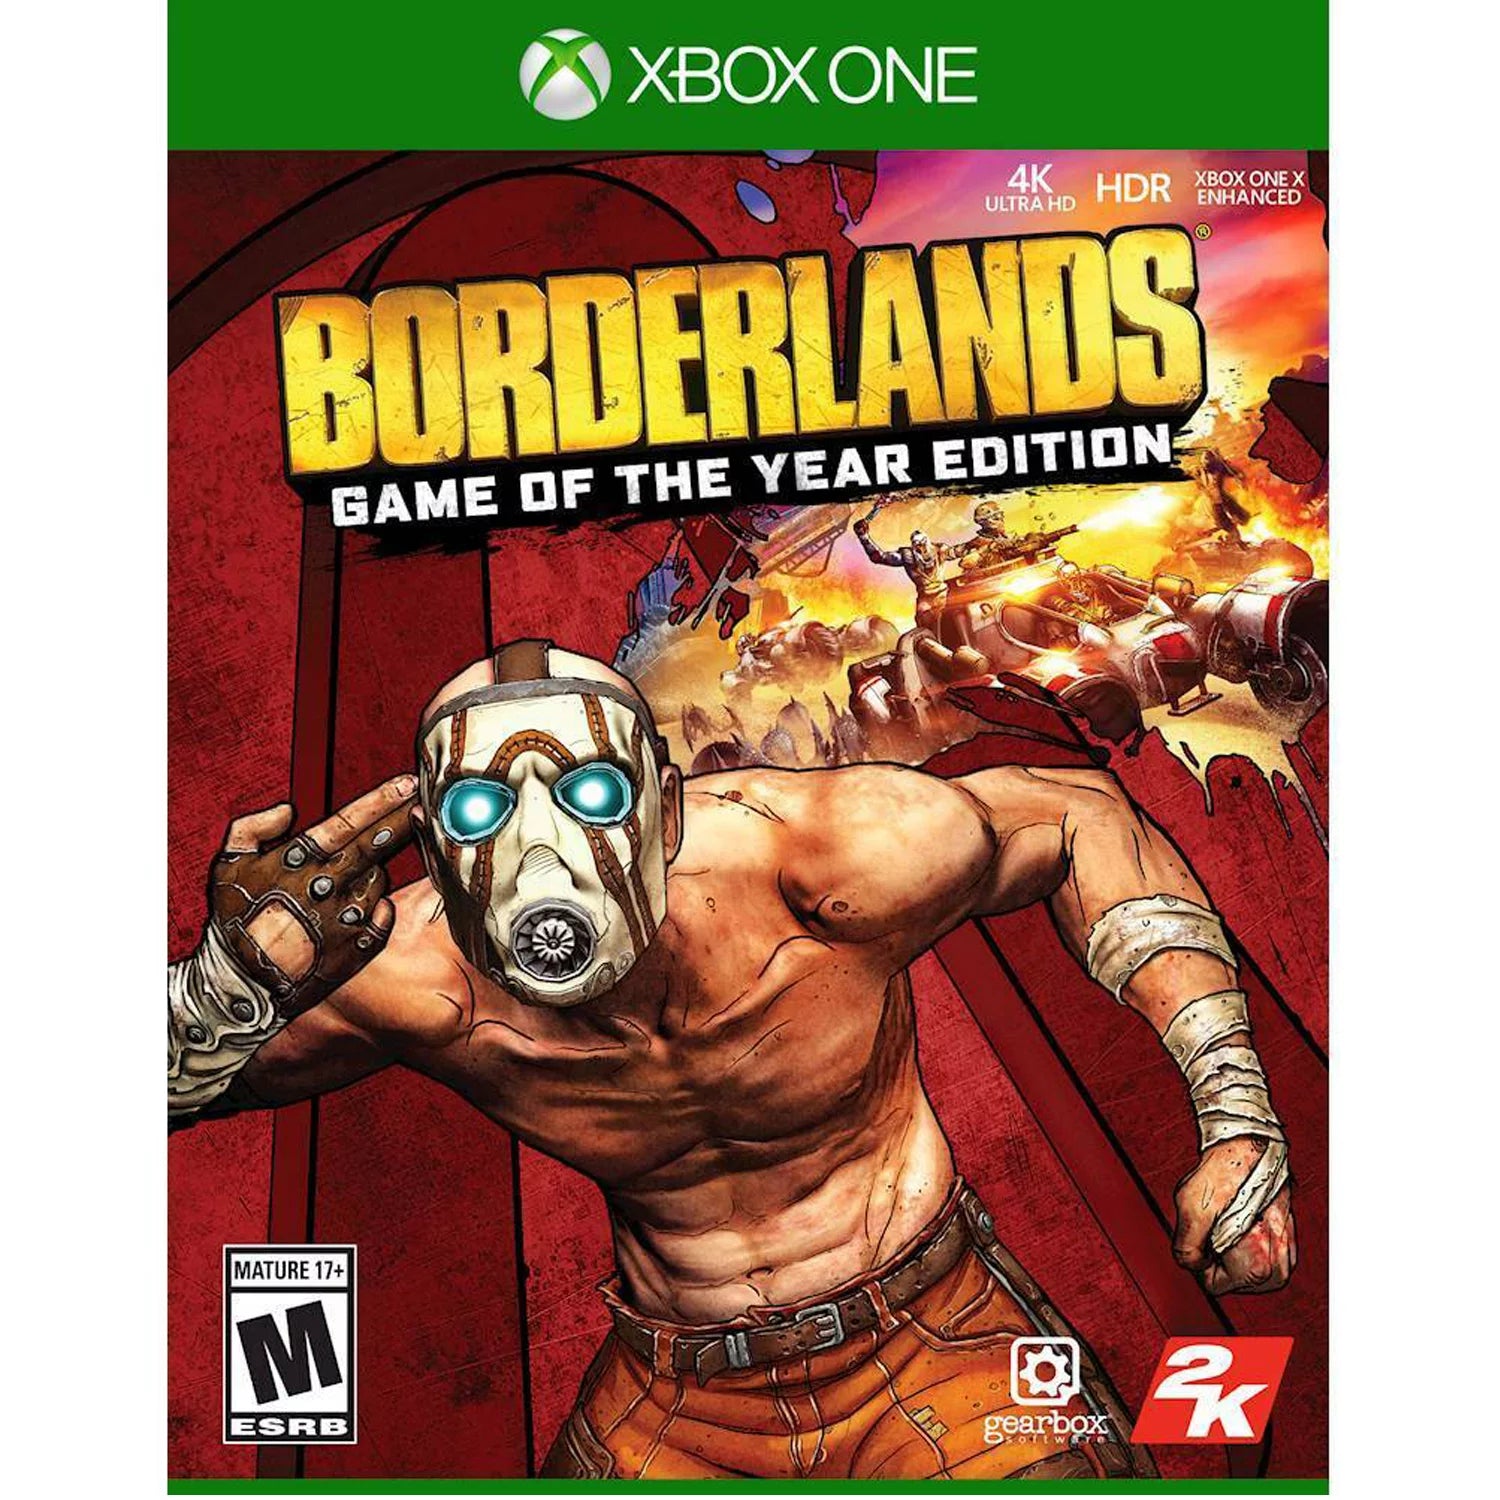 Borderlands, Game Of The Year Edition for Xbox One